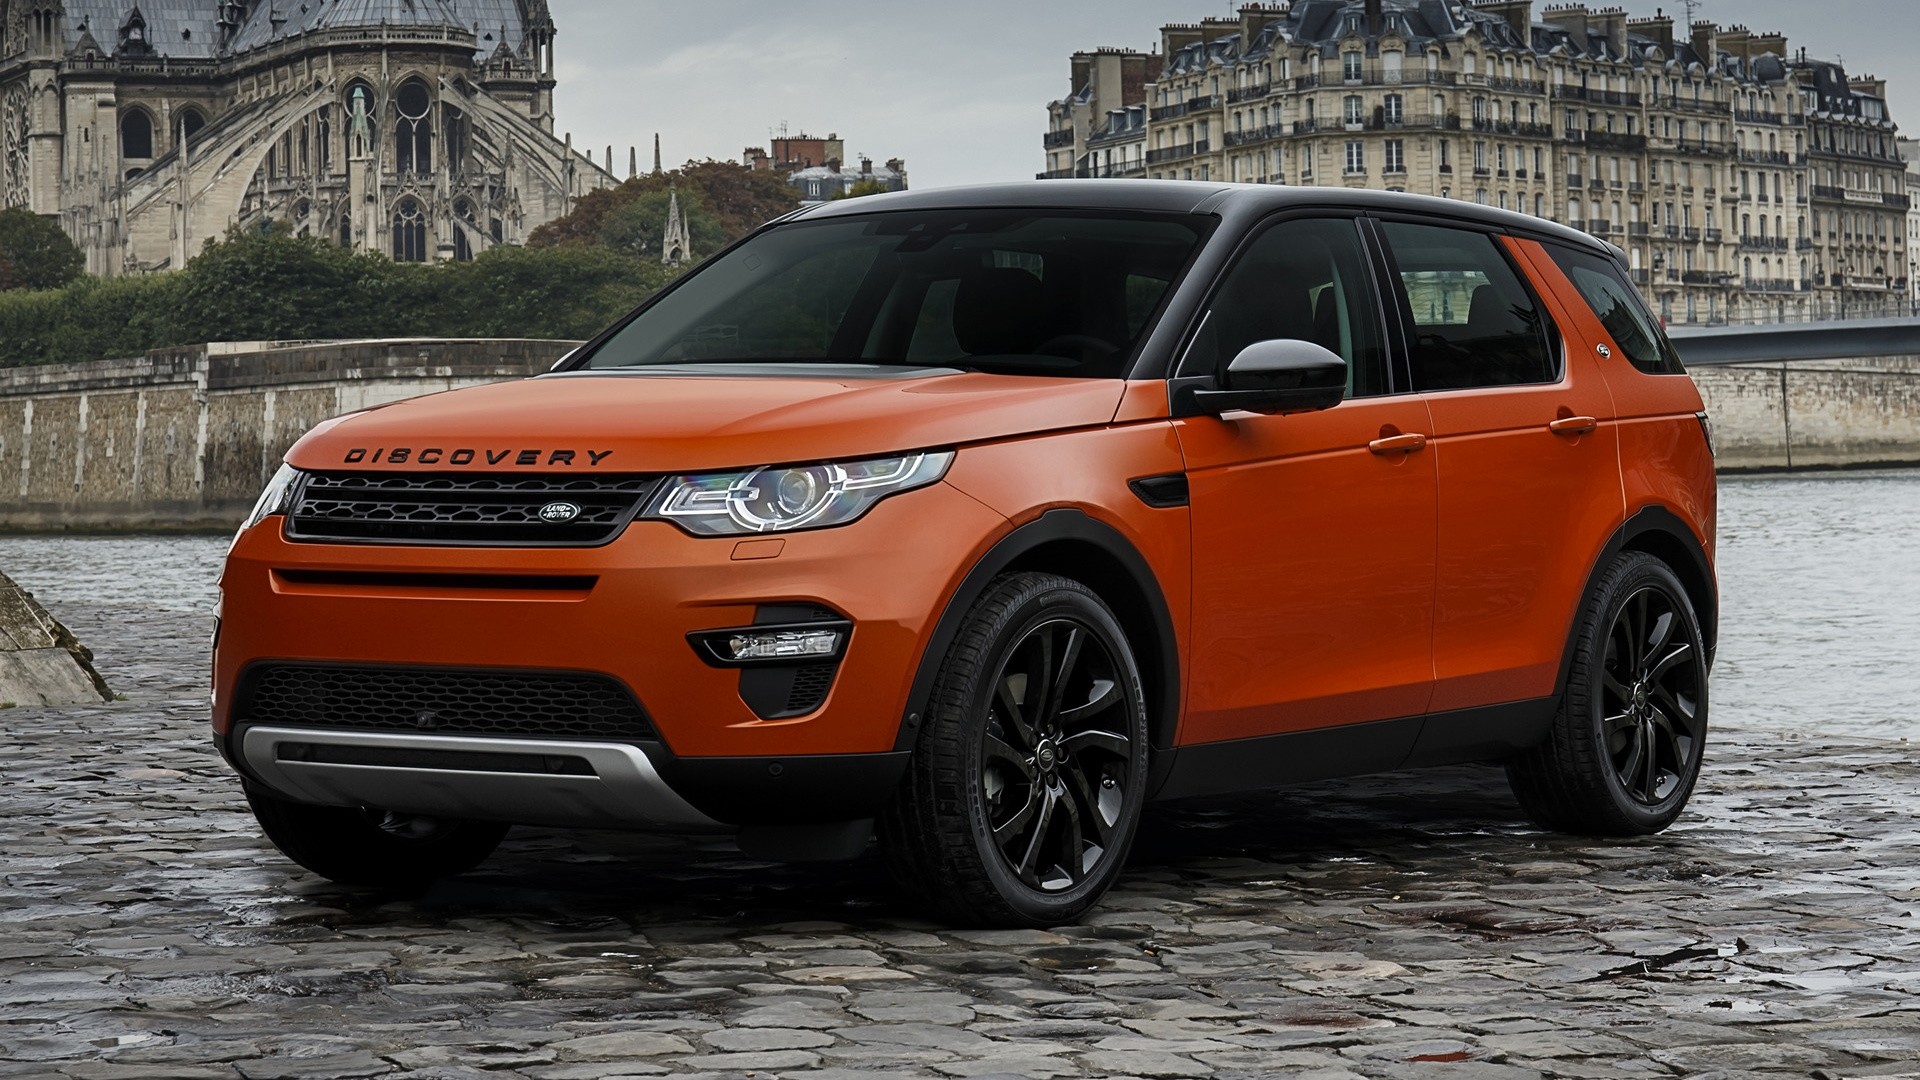 Land Rover Discovery HD Wallpaper Background Image